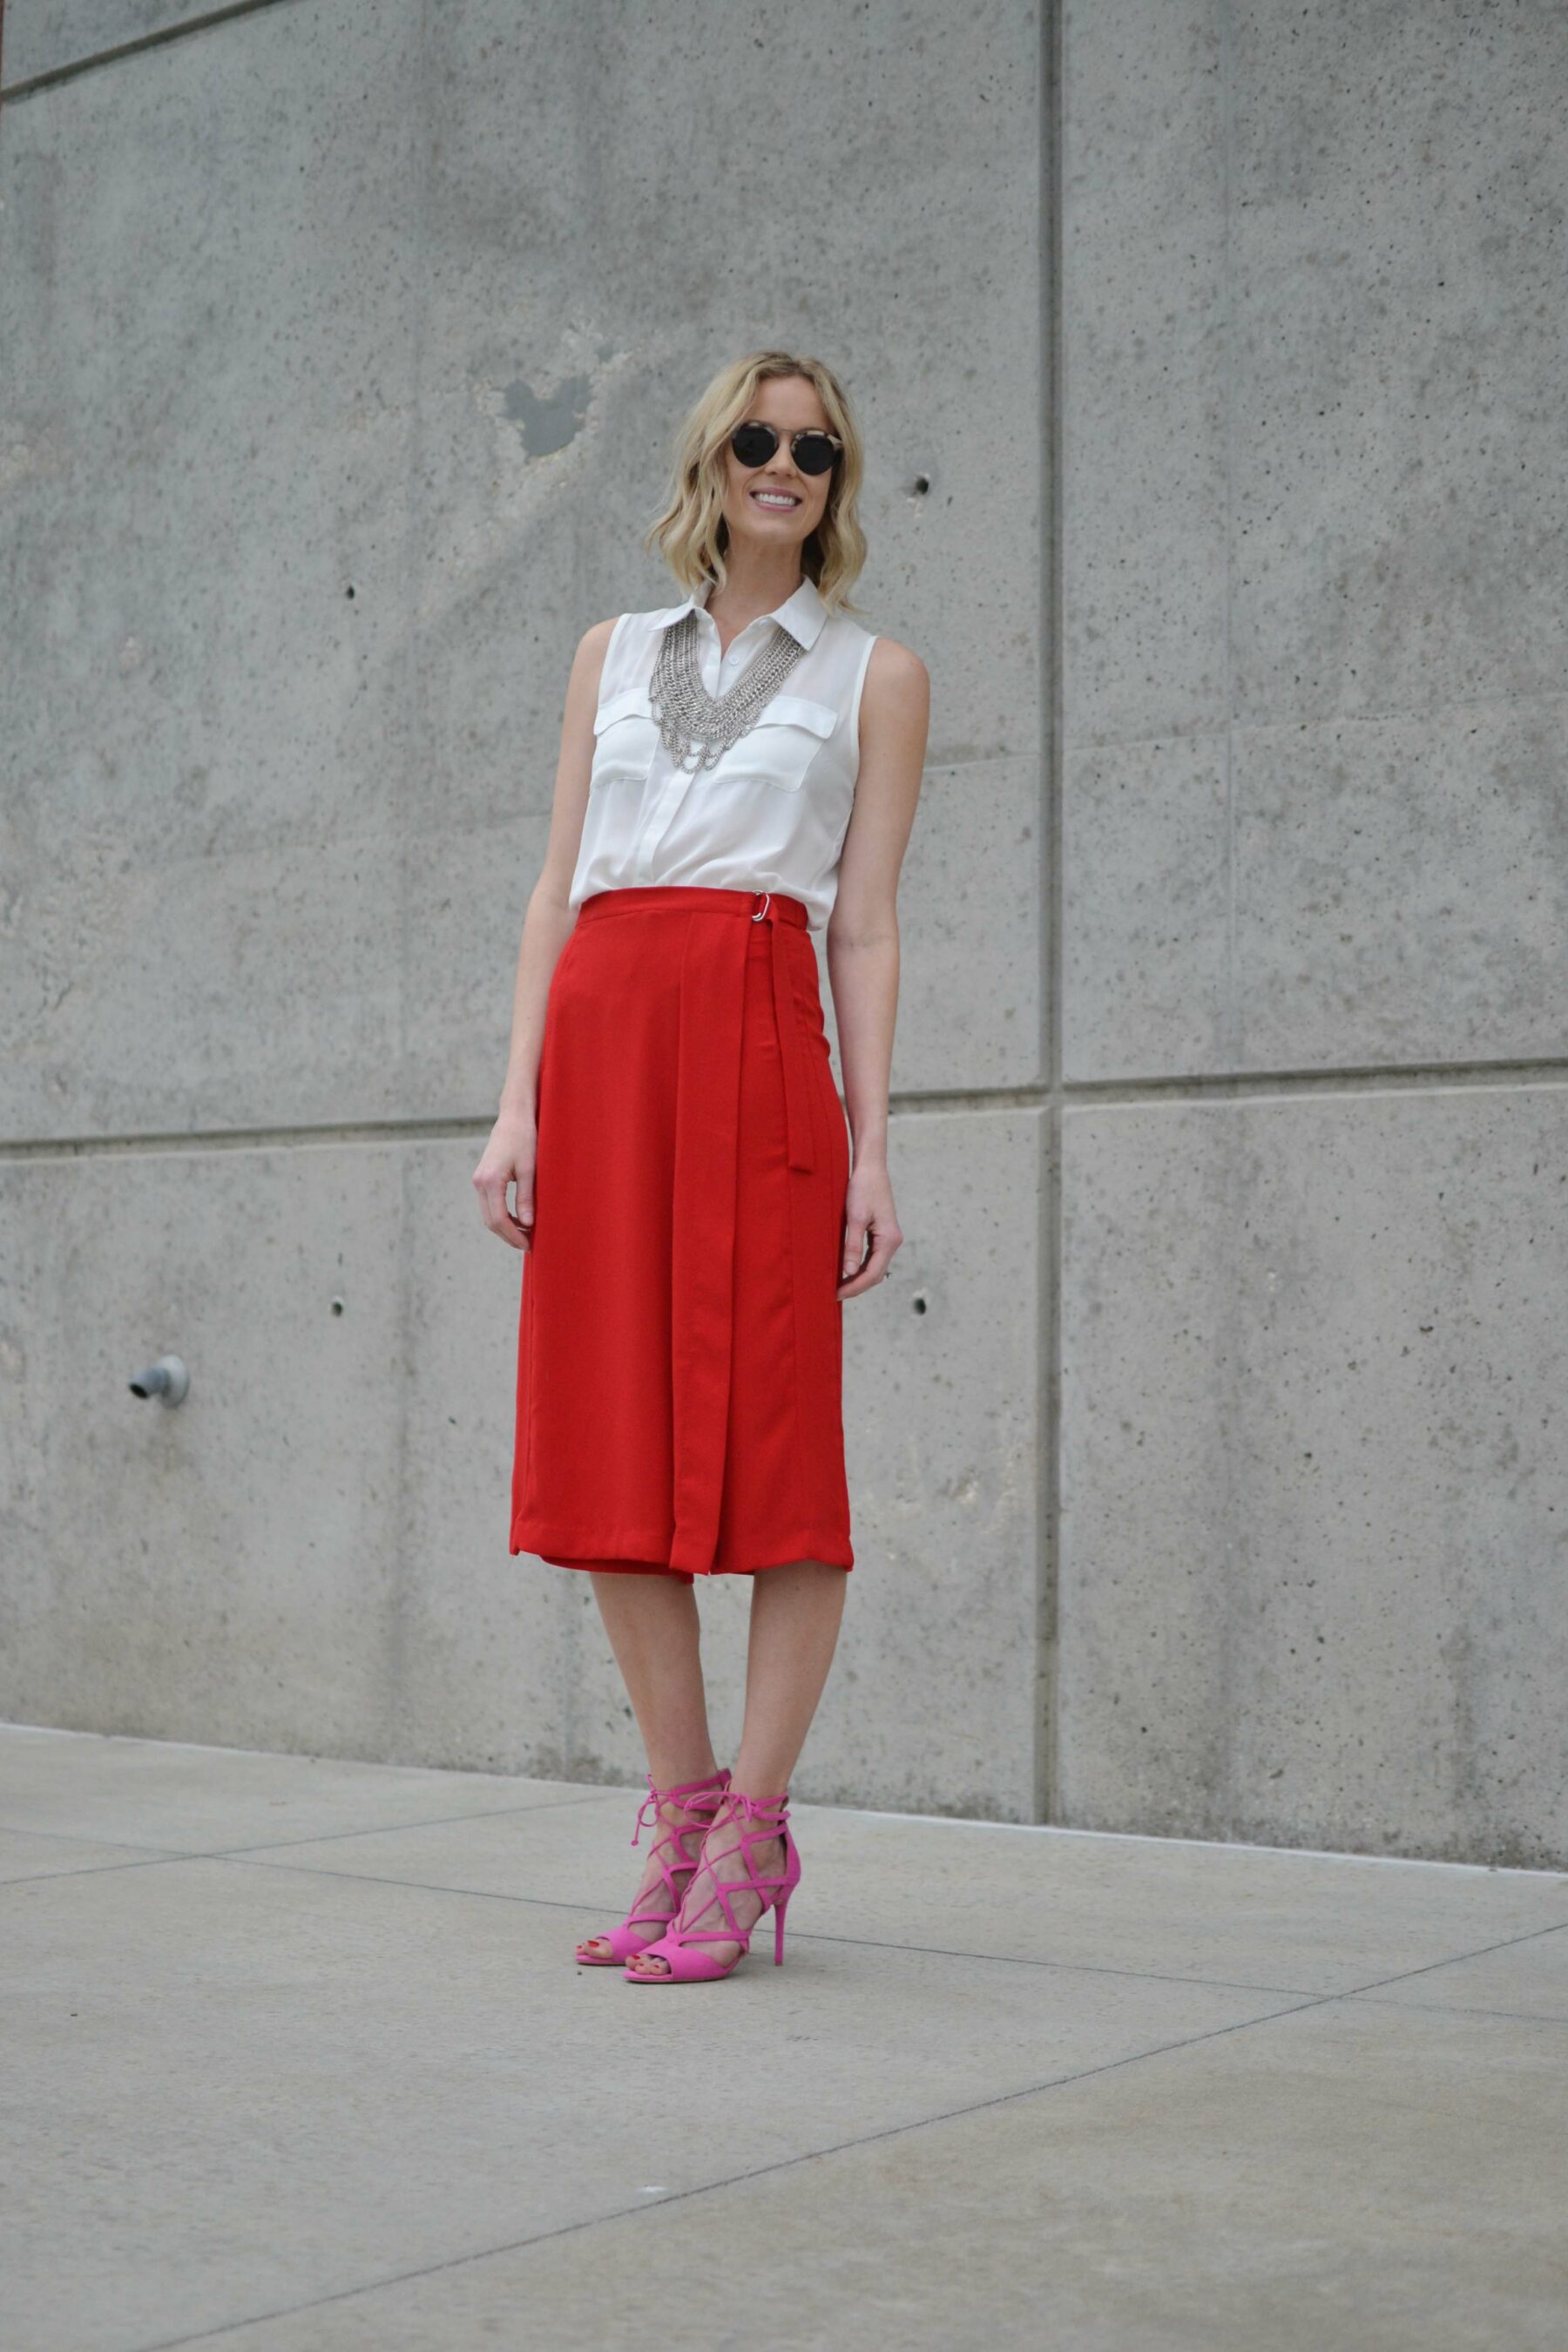 TGIF: Going Casual with Hot Pink Shorts and Gingham